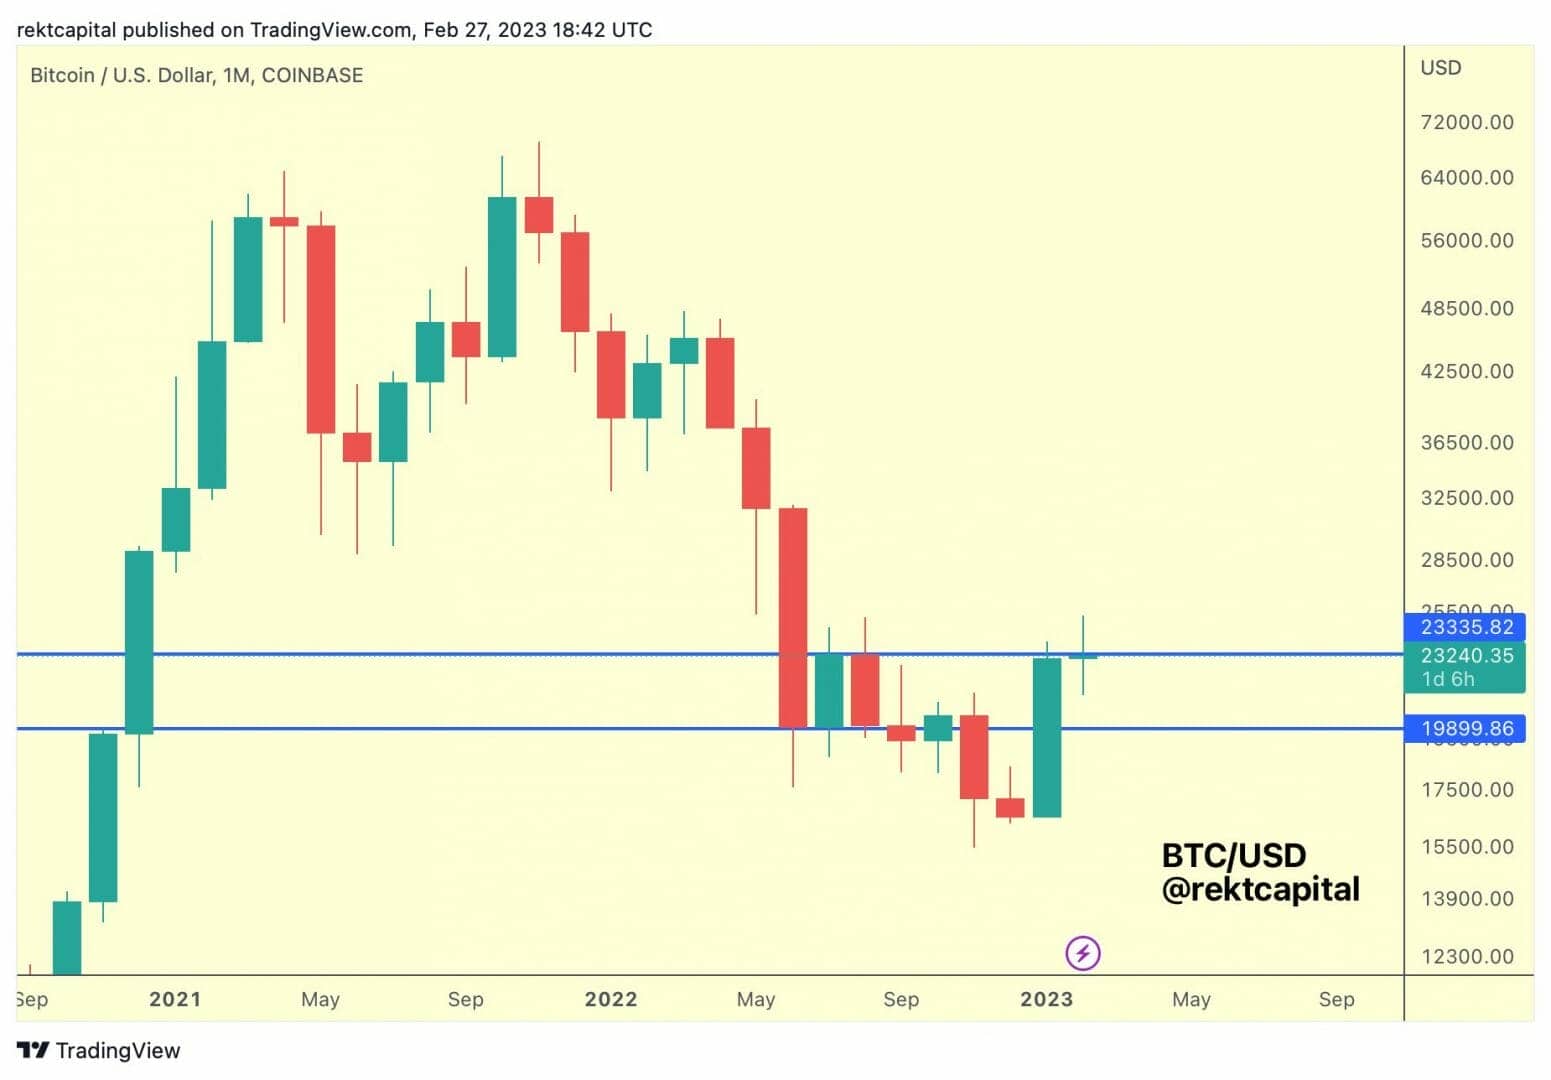 The $23,400, a key level for the Bitcoin price monthly close.